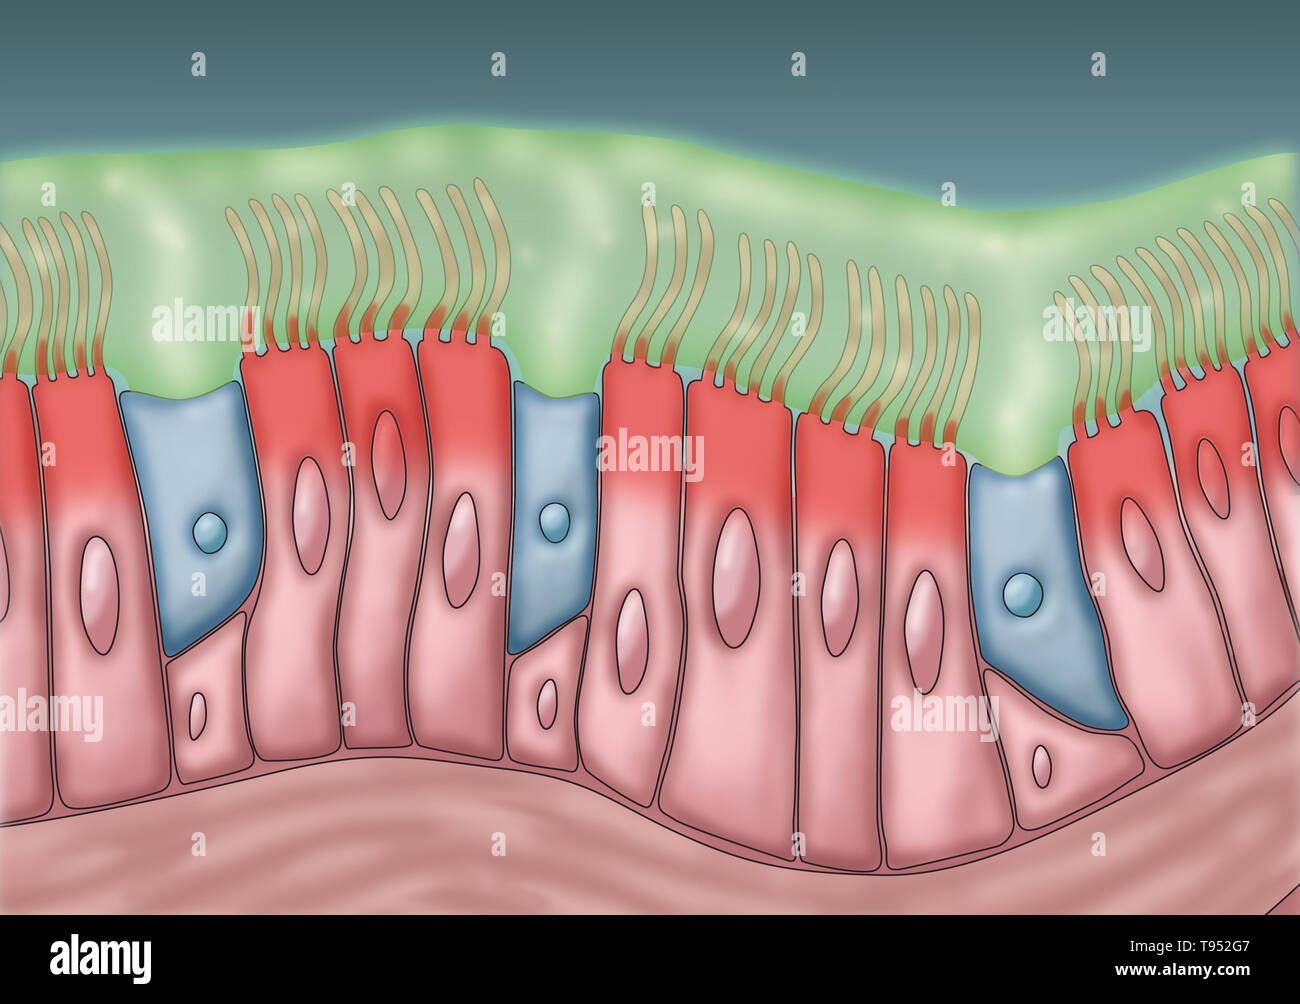 Medical illustration depicting cilia and mucus. The rhythmic back and forth movement of the cilia move mucus and trapped particles, such as bacteria and viruses, out of the sinuses. Stock Photo